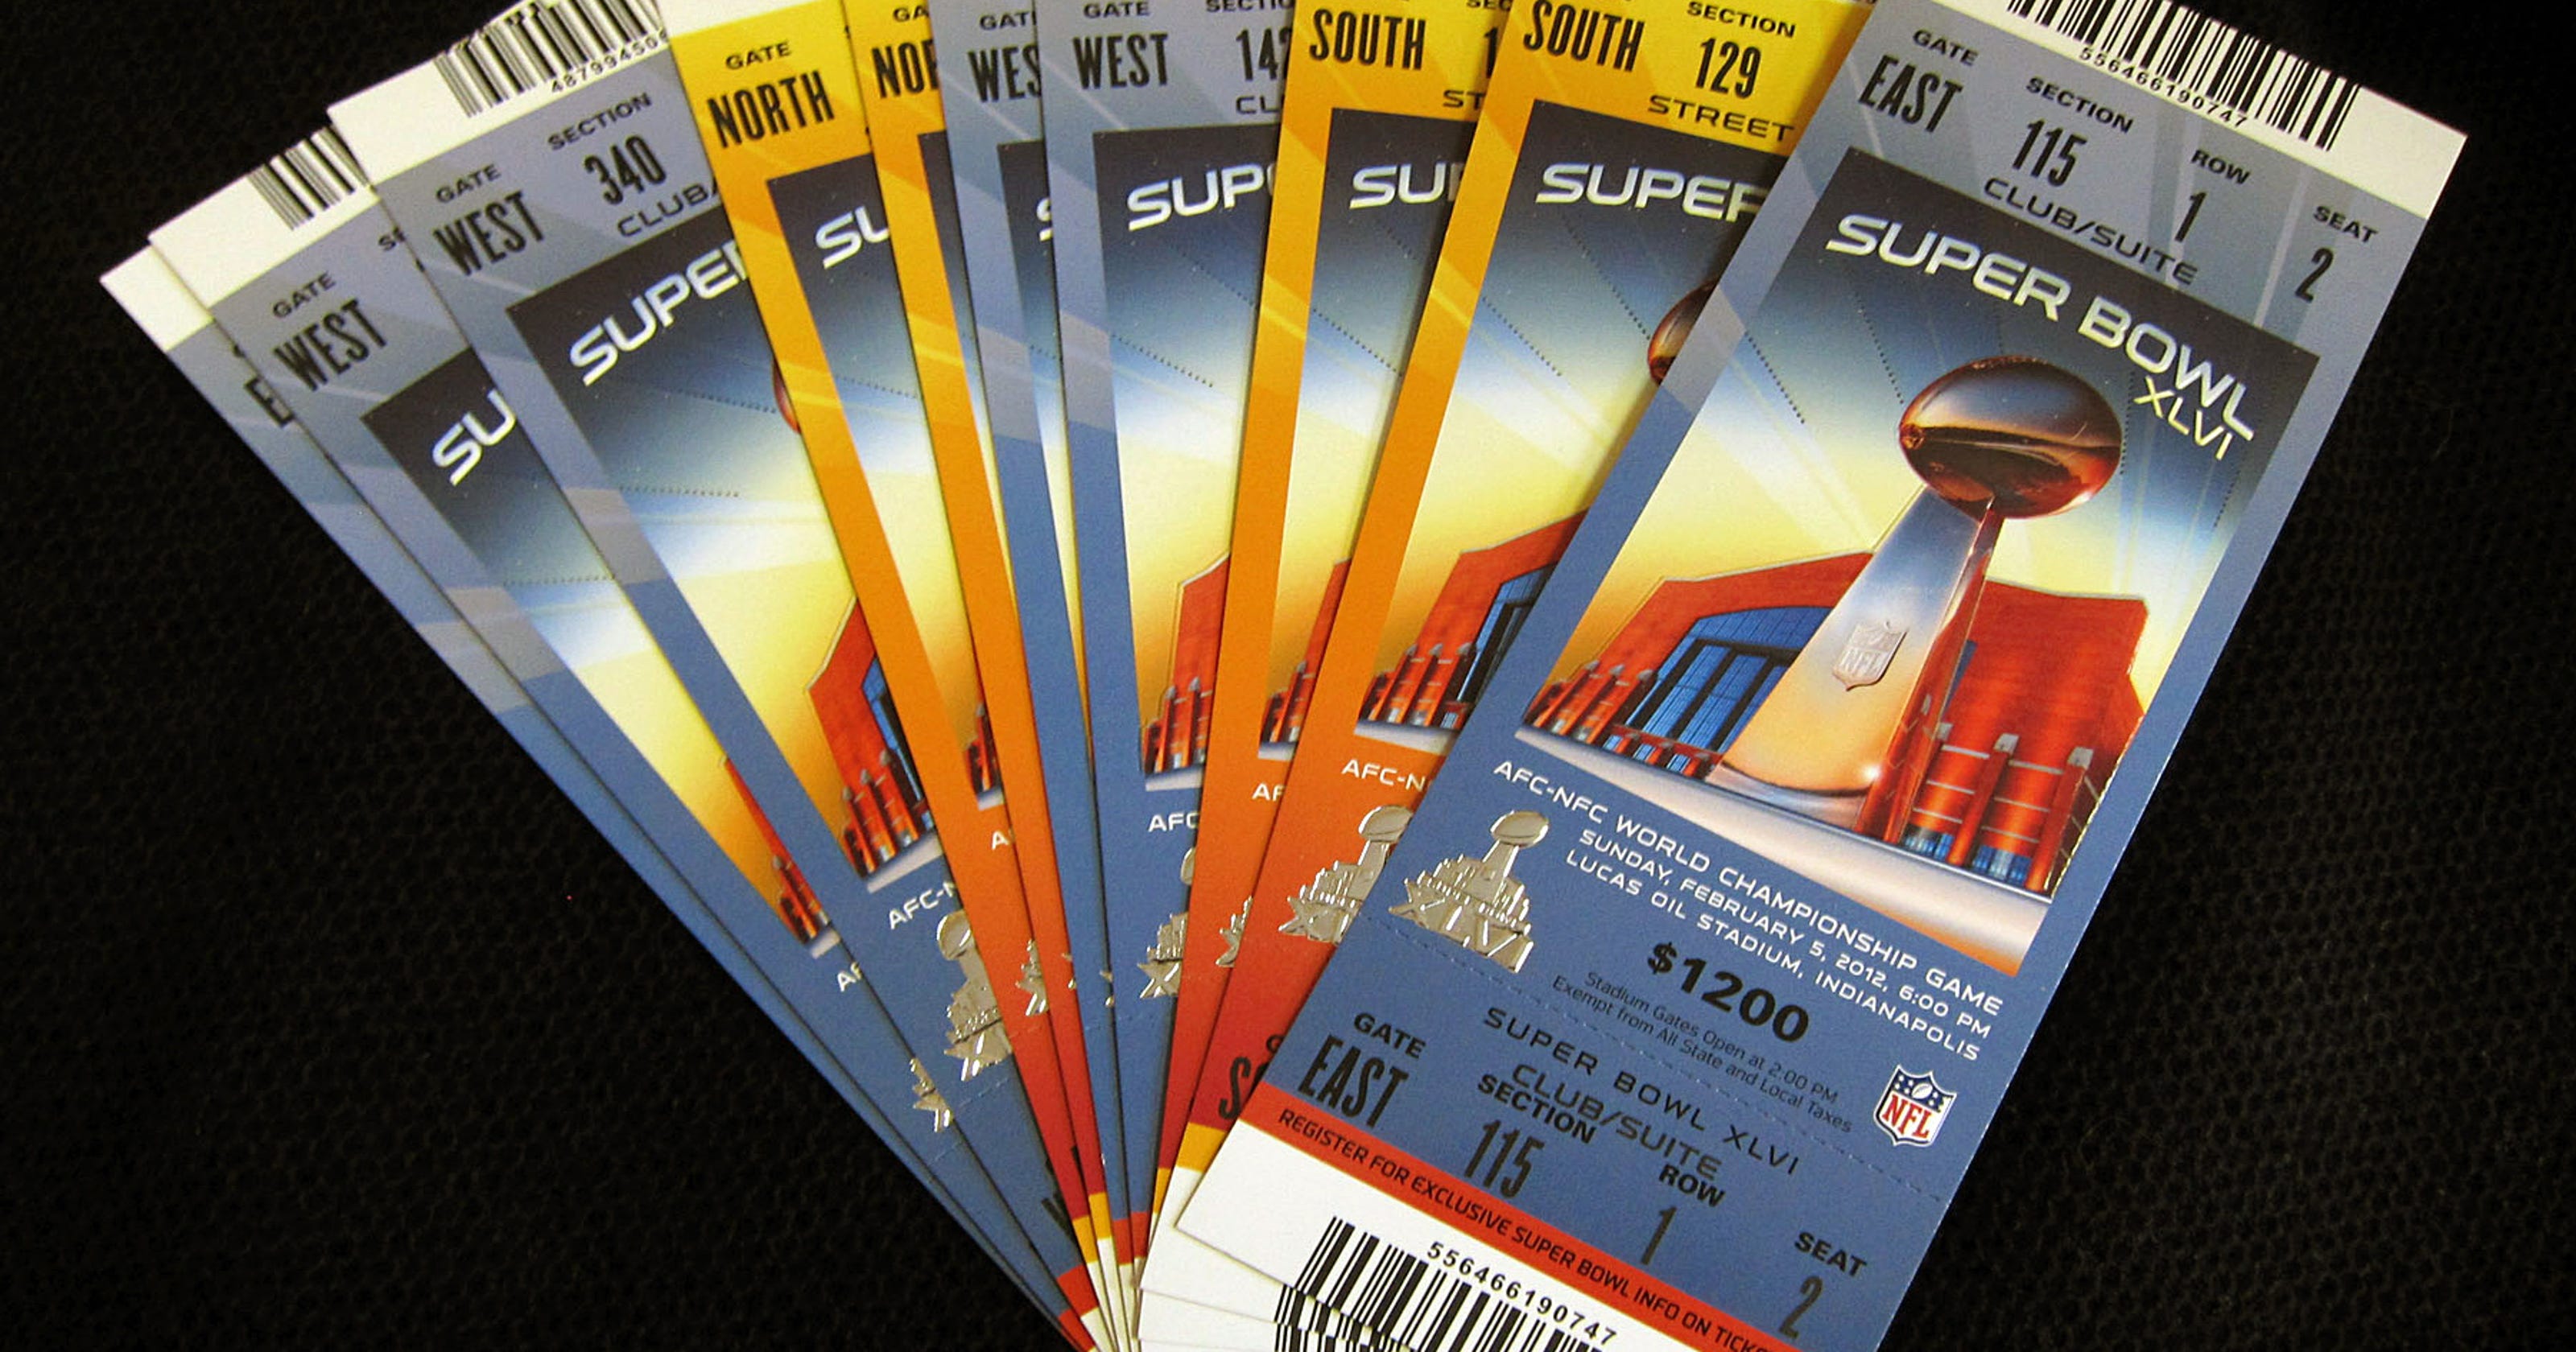 NFL jacking up prices on Super Bowl tickets